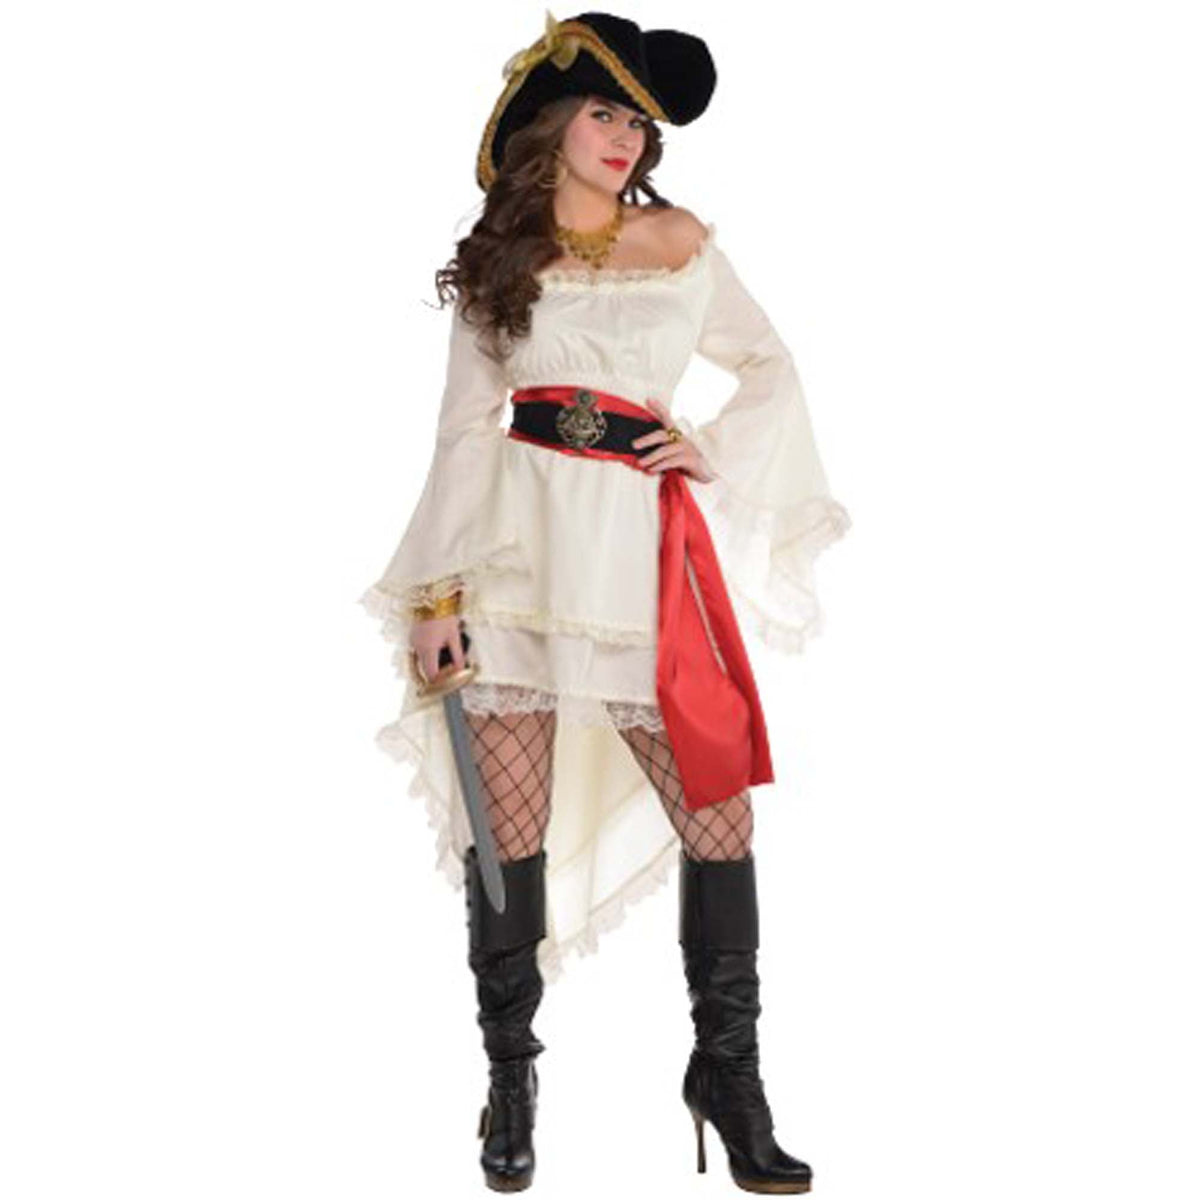 HALLOWEEN COSTUME CO. Costume Accessories Pirate Dress for Adults, White Dress